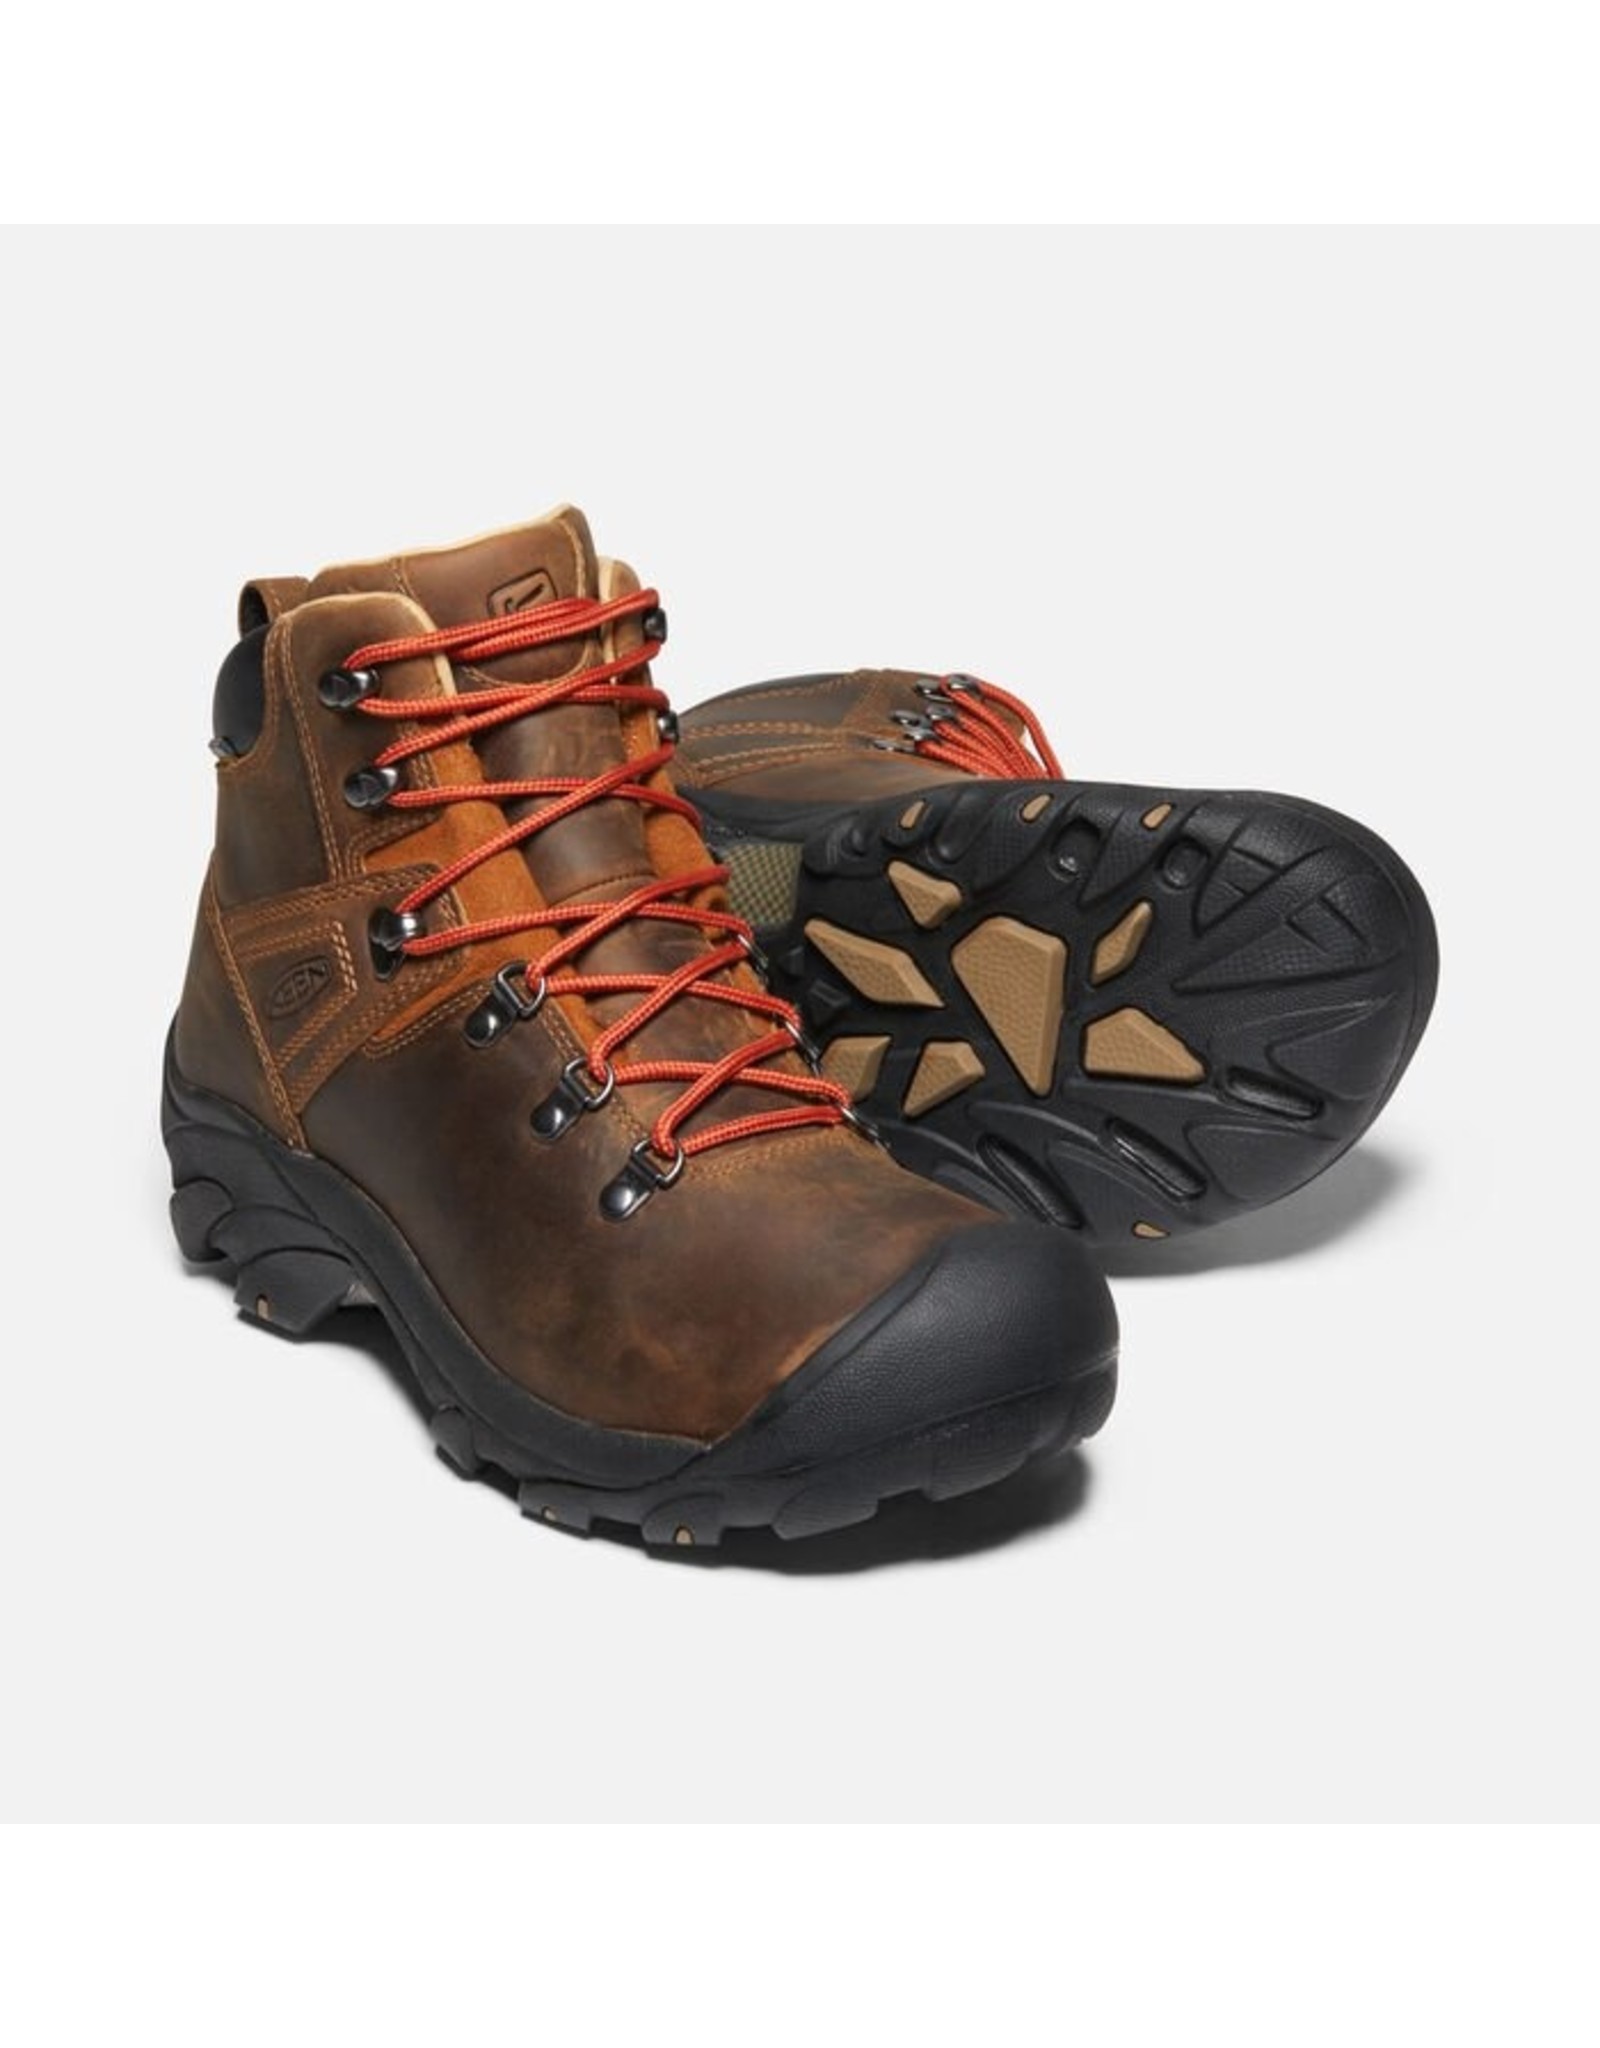 KEEN MEN'S PYRENEES BOOT-SYRUP